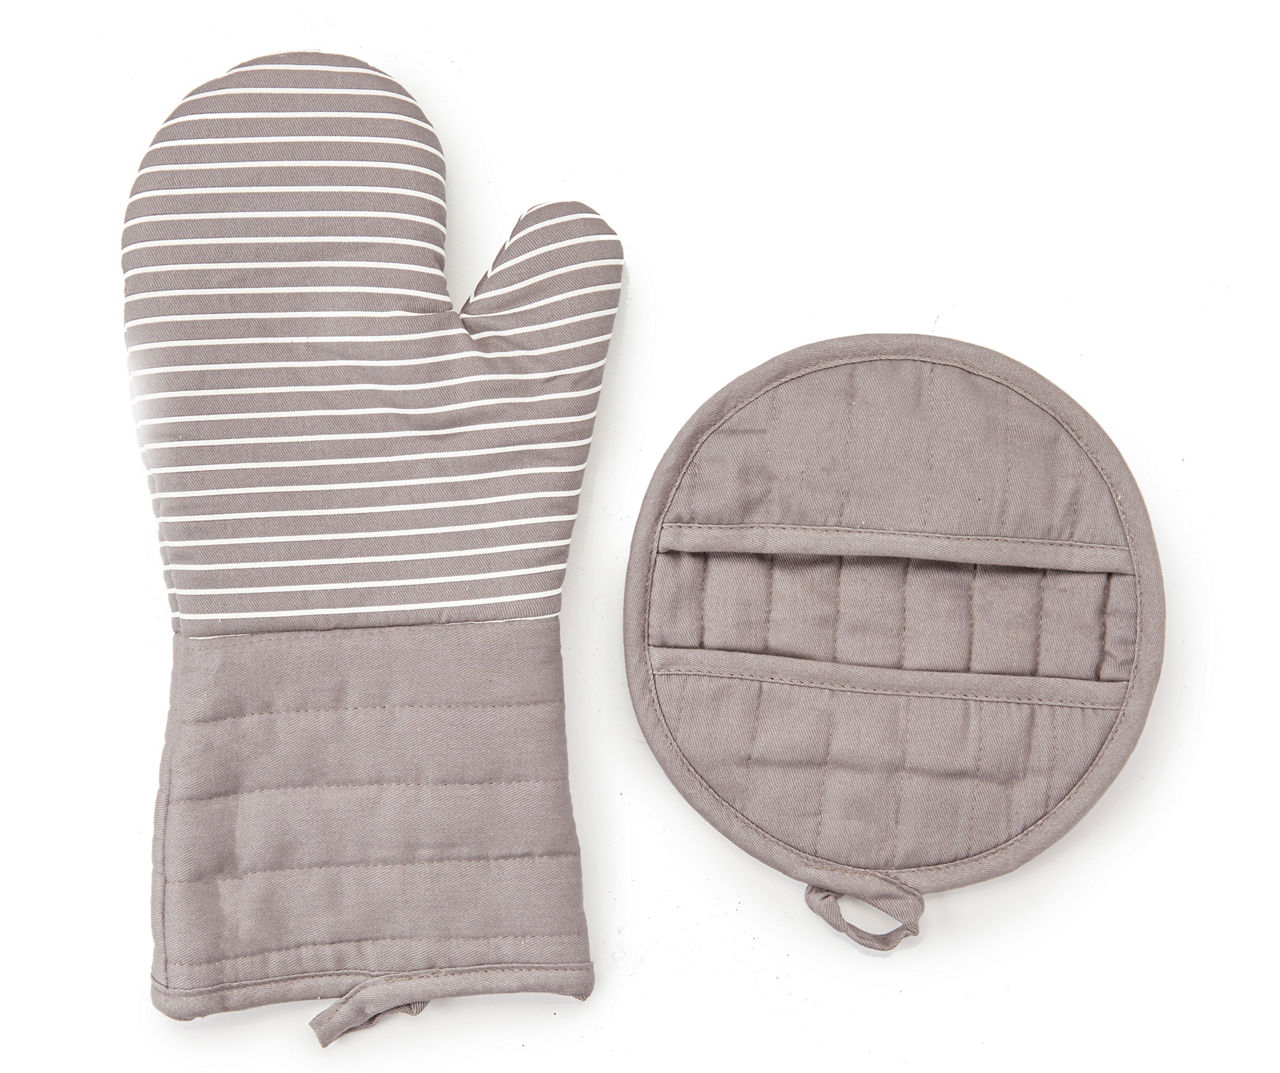 Modern Oven Mitts and Pot Holders